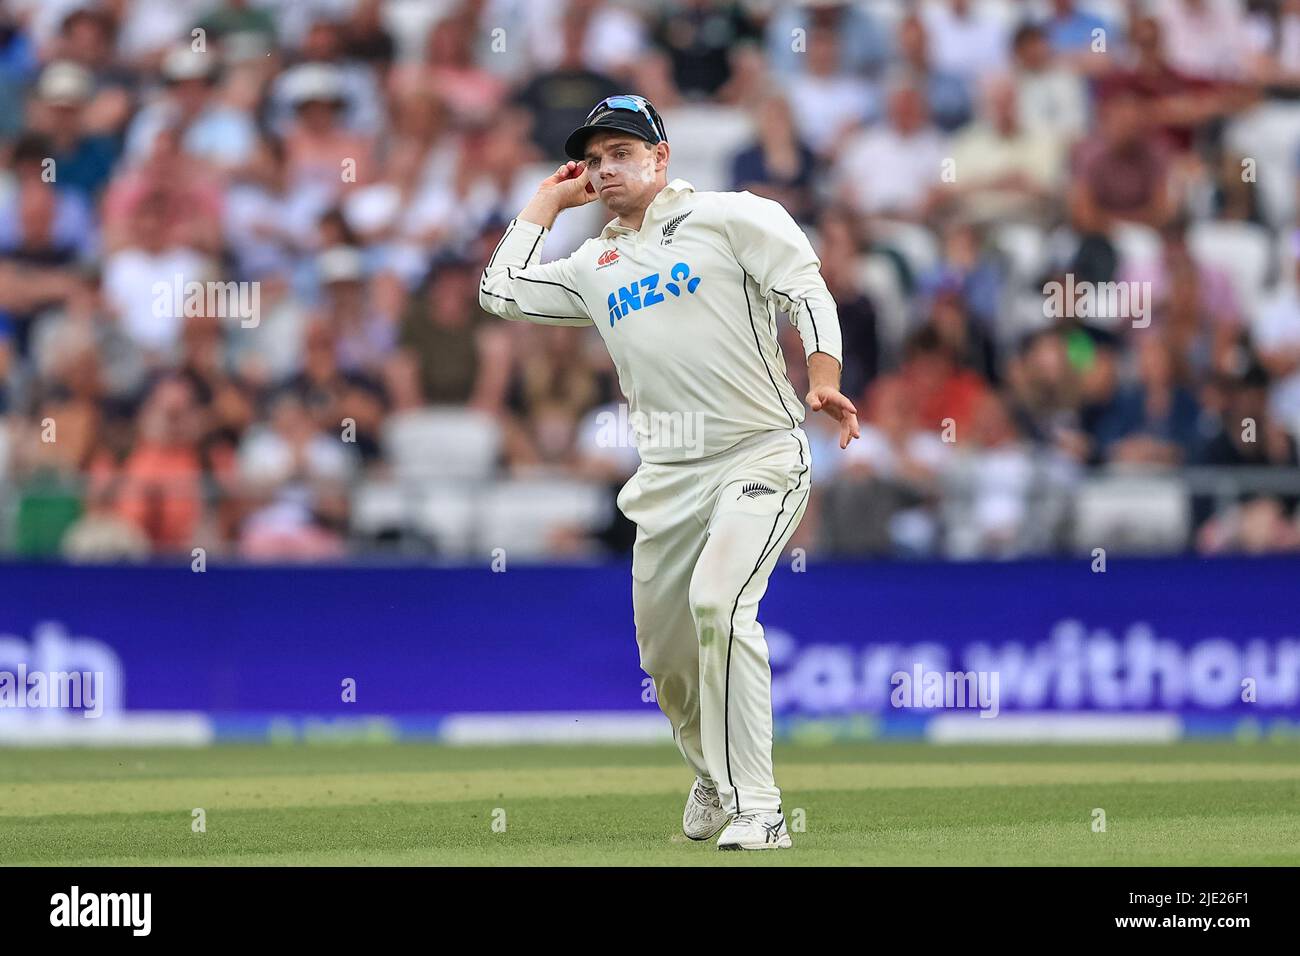 Leeds, UK. 24th June, 2022. Tom Latham of New Zealand in action during the game in Leeds, United Kingdom on 6/24/2022. (Photo by Mark Cosgrove/News Images/Sipa USA) Credit: Sipa USA/Alamy Live News Stock Photo